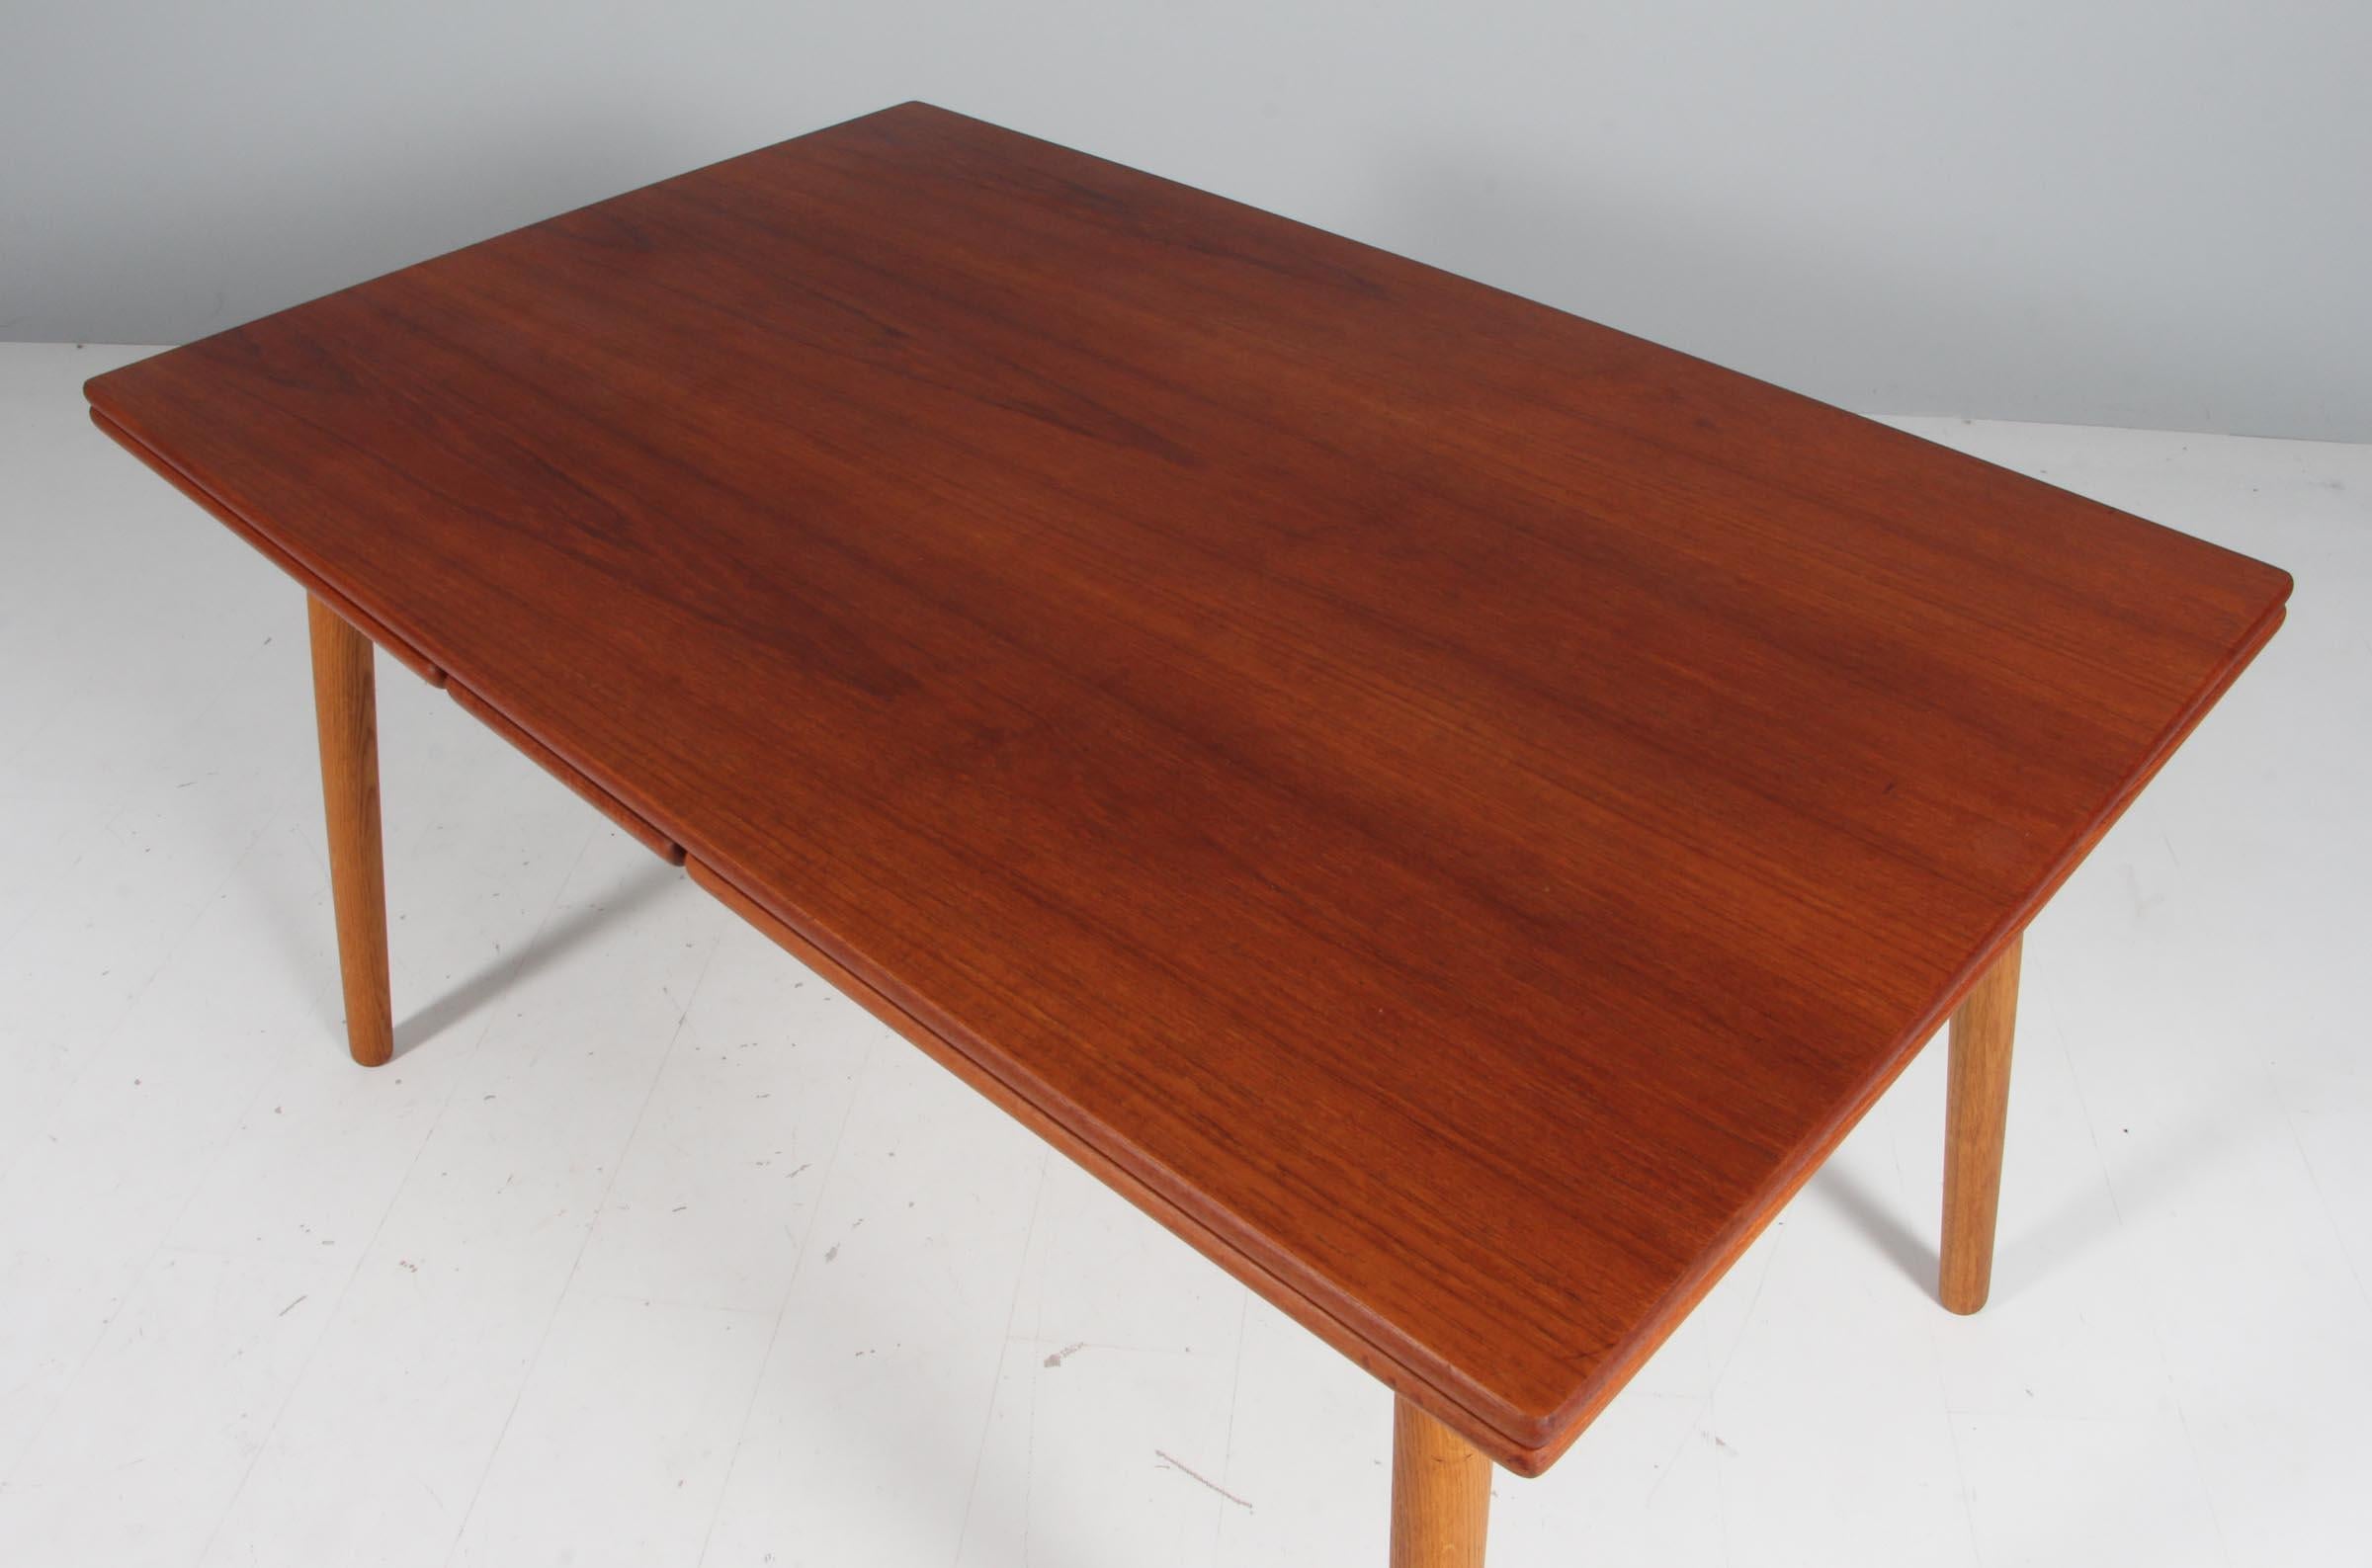 Poul Volther dining table with top of veenered teak, two extension leafes of 55 cms. 

Base of solid oak.

Made by FDB.